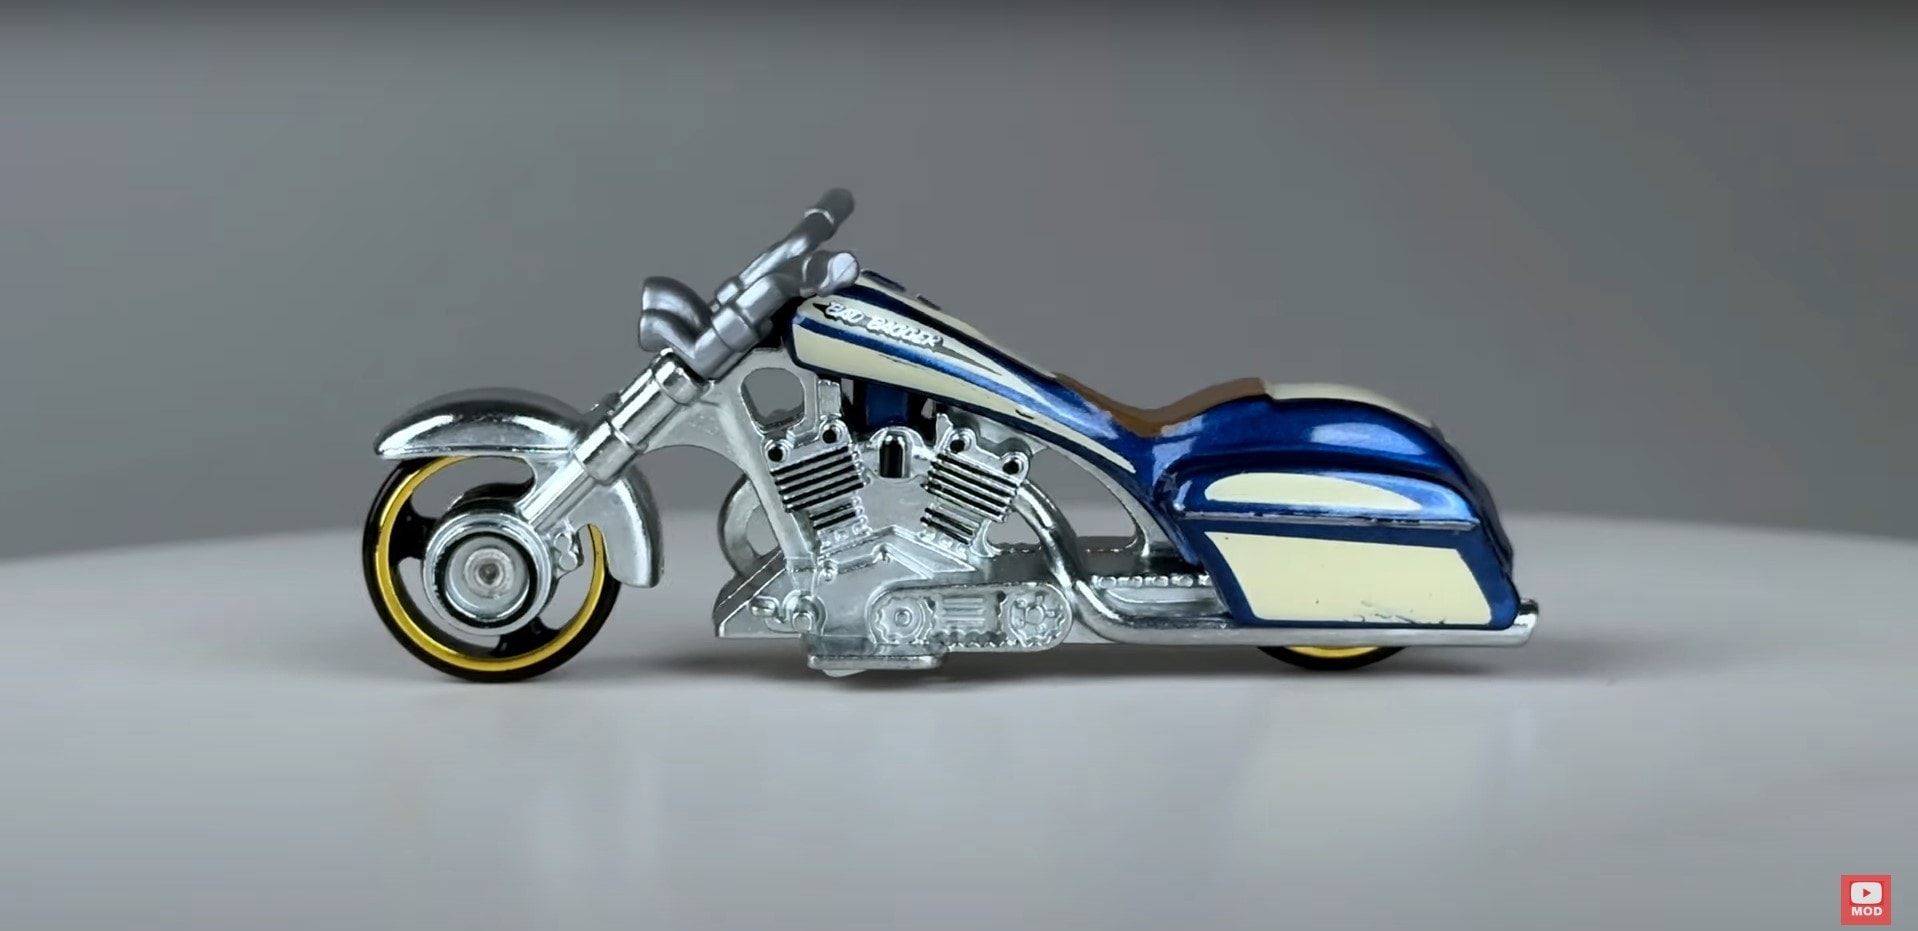 Hot Wheels Bad Bagger Is Back Thanks to a New Motorcycle Set – autoevolution